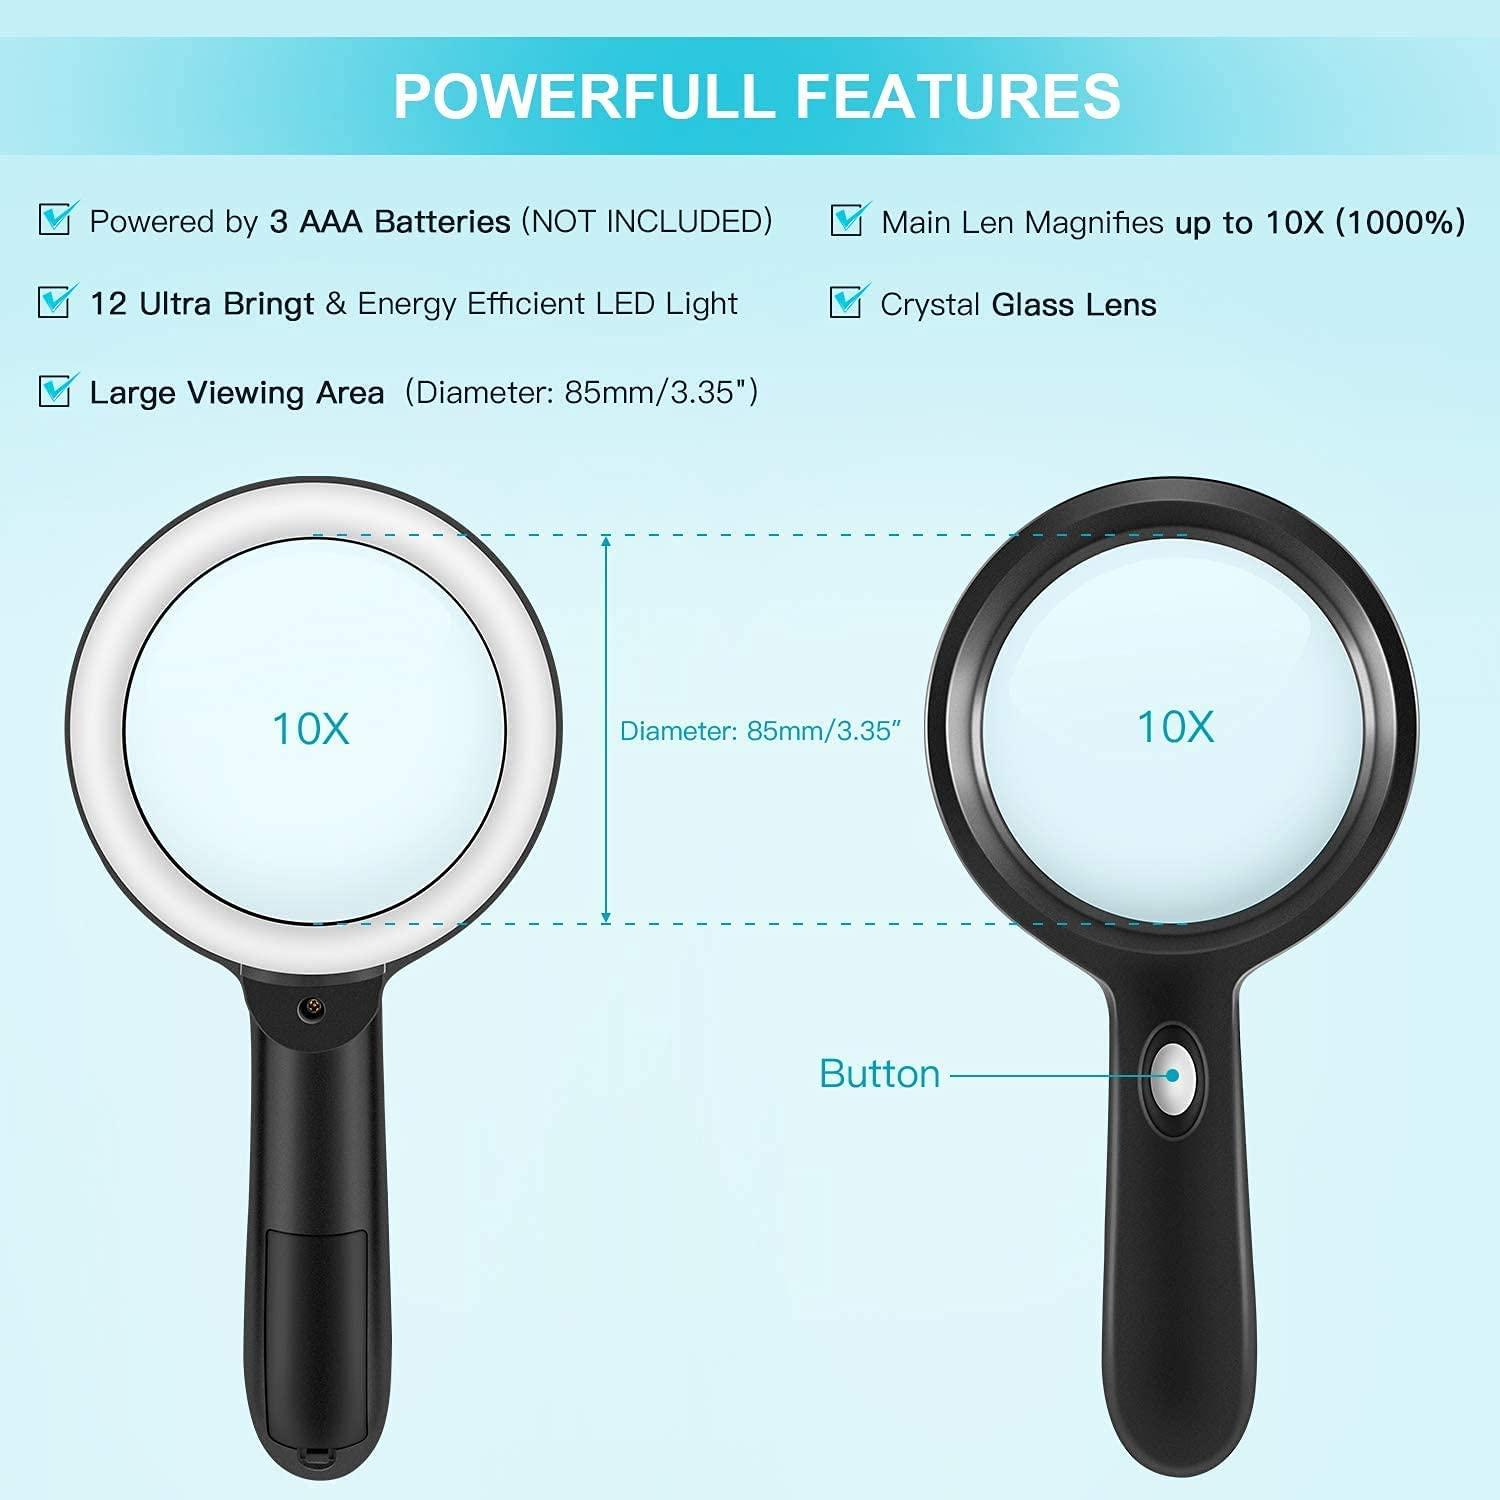 HYOIIO 10x Magnifying Glass with Light, Lighted Magnifying Glass